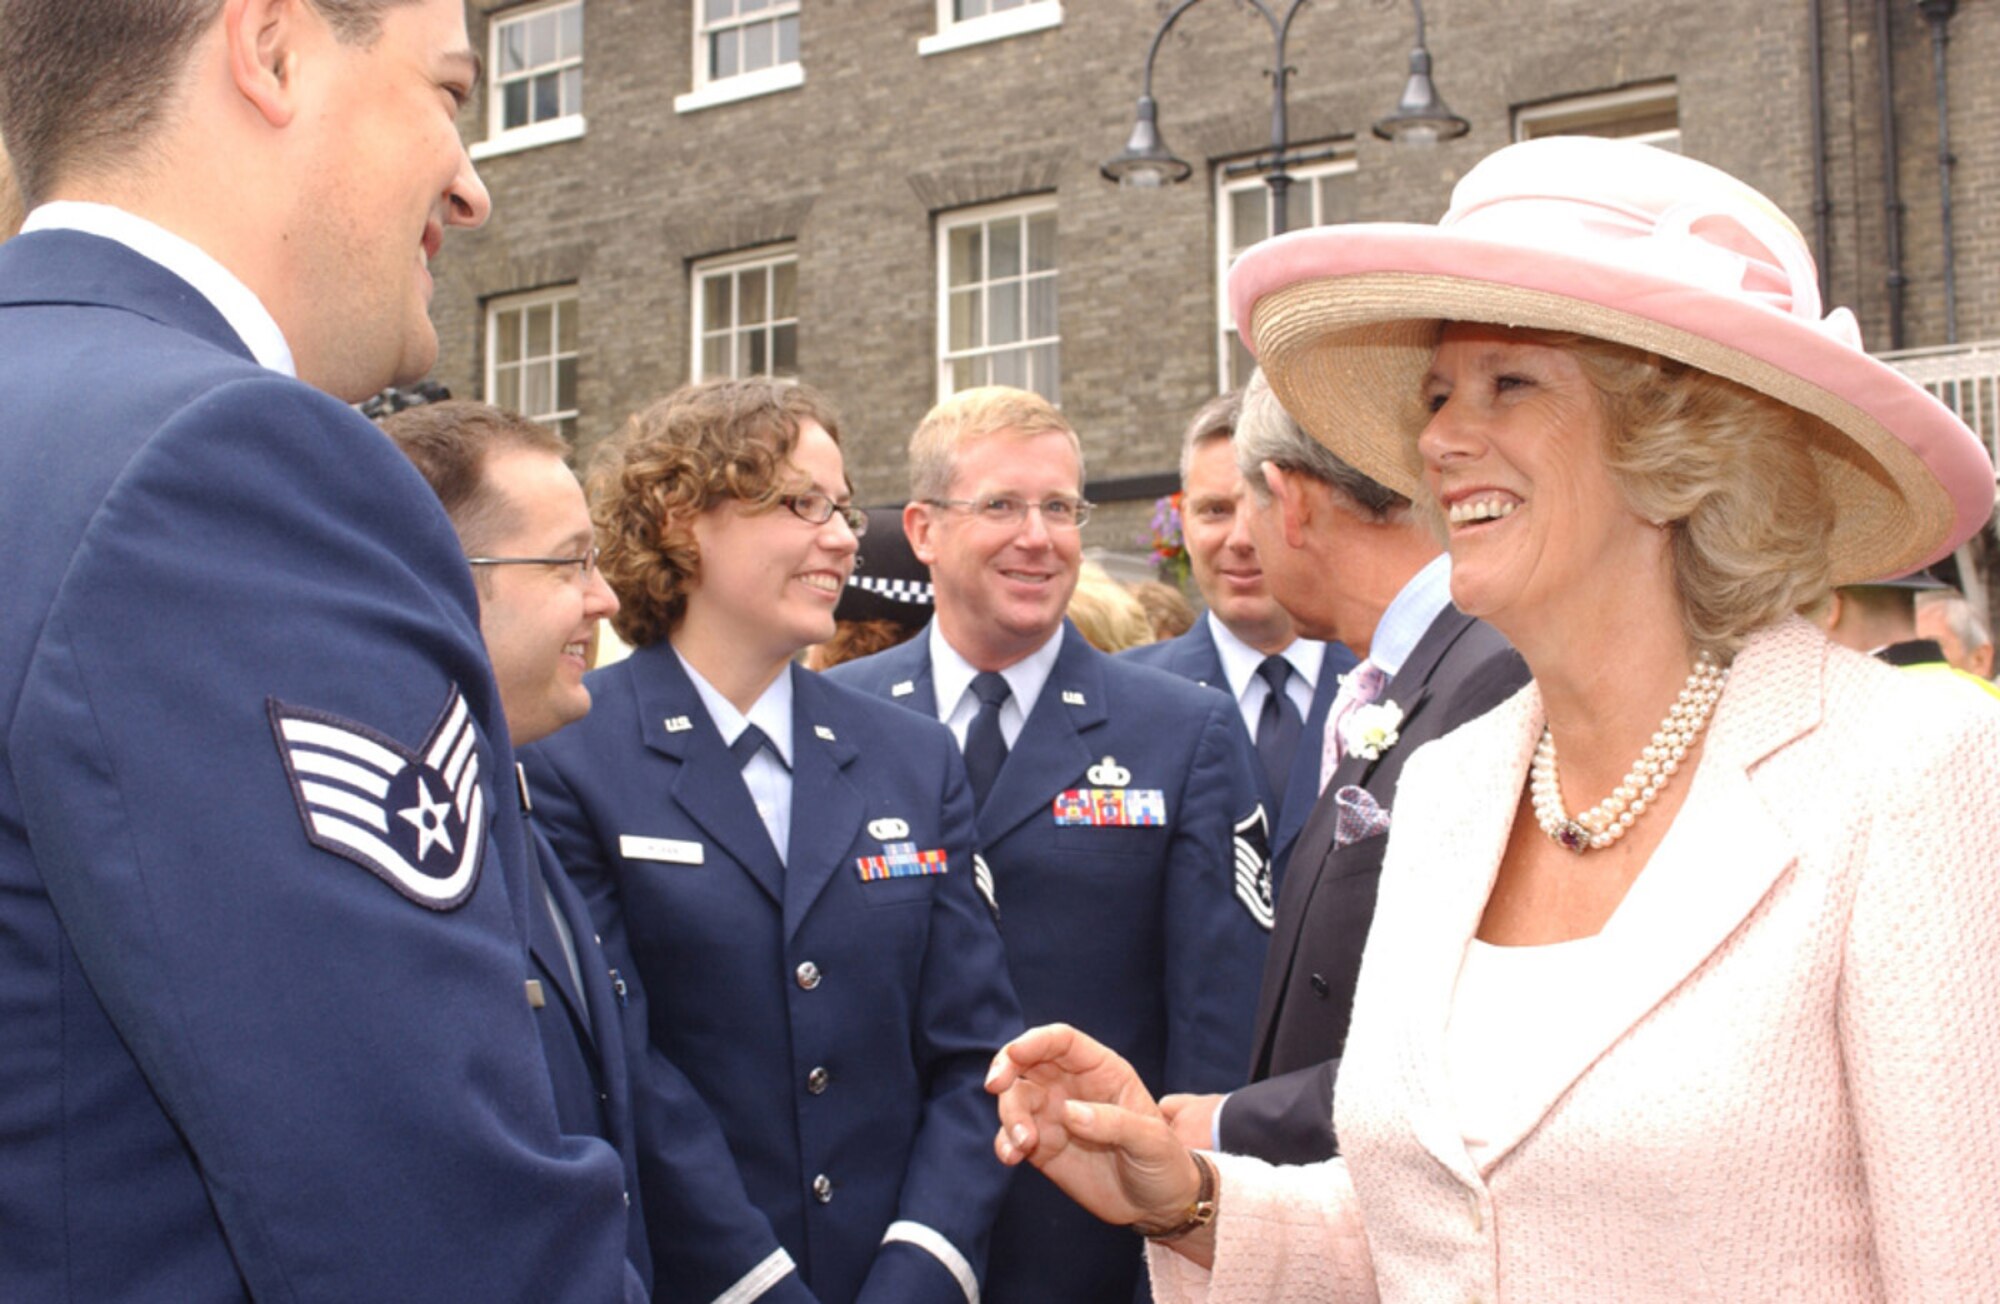 ROYAL AIR FORCE MILDENHALL, England (USAFENS) -- The members of the U.S. Air Forces in Europe Band's Brass Quintet met the Prince of Wales and the Duchess of Cornwall after the official ceremony for the completion of the Millennium Tower Project at St. Edmundsbury Cathedral in Bury St. Edmunds, England, July 22. The Brass Quintet performed, at the invitation of the Very Reverend Dean Atwell, Dean of St. Edmundsbury Cathedral, on Angel Hill outside the cathedral and in the historic Abbey gardens during the celebrations. (Photo by Staff Sgt. Valerie Smith)